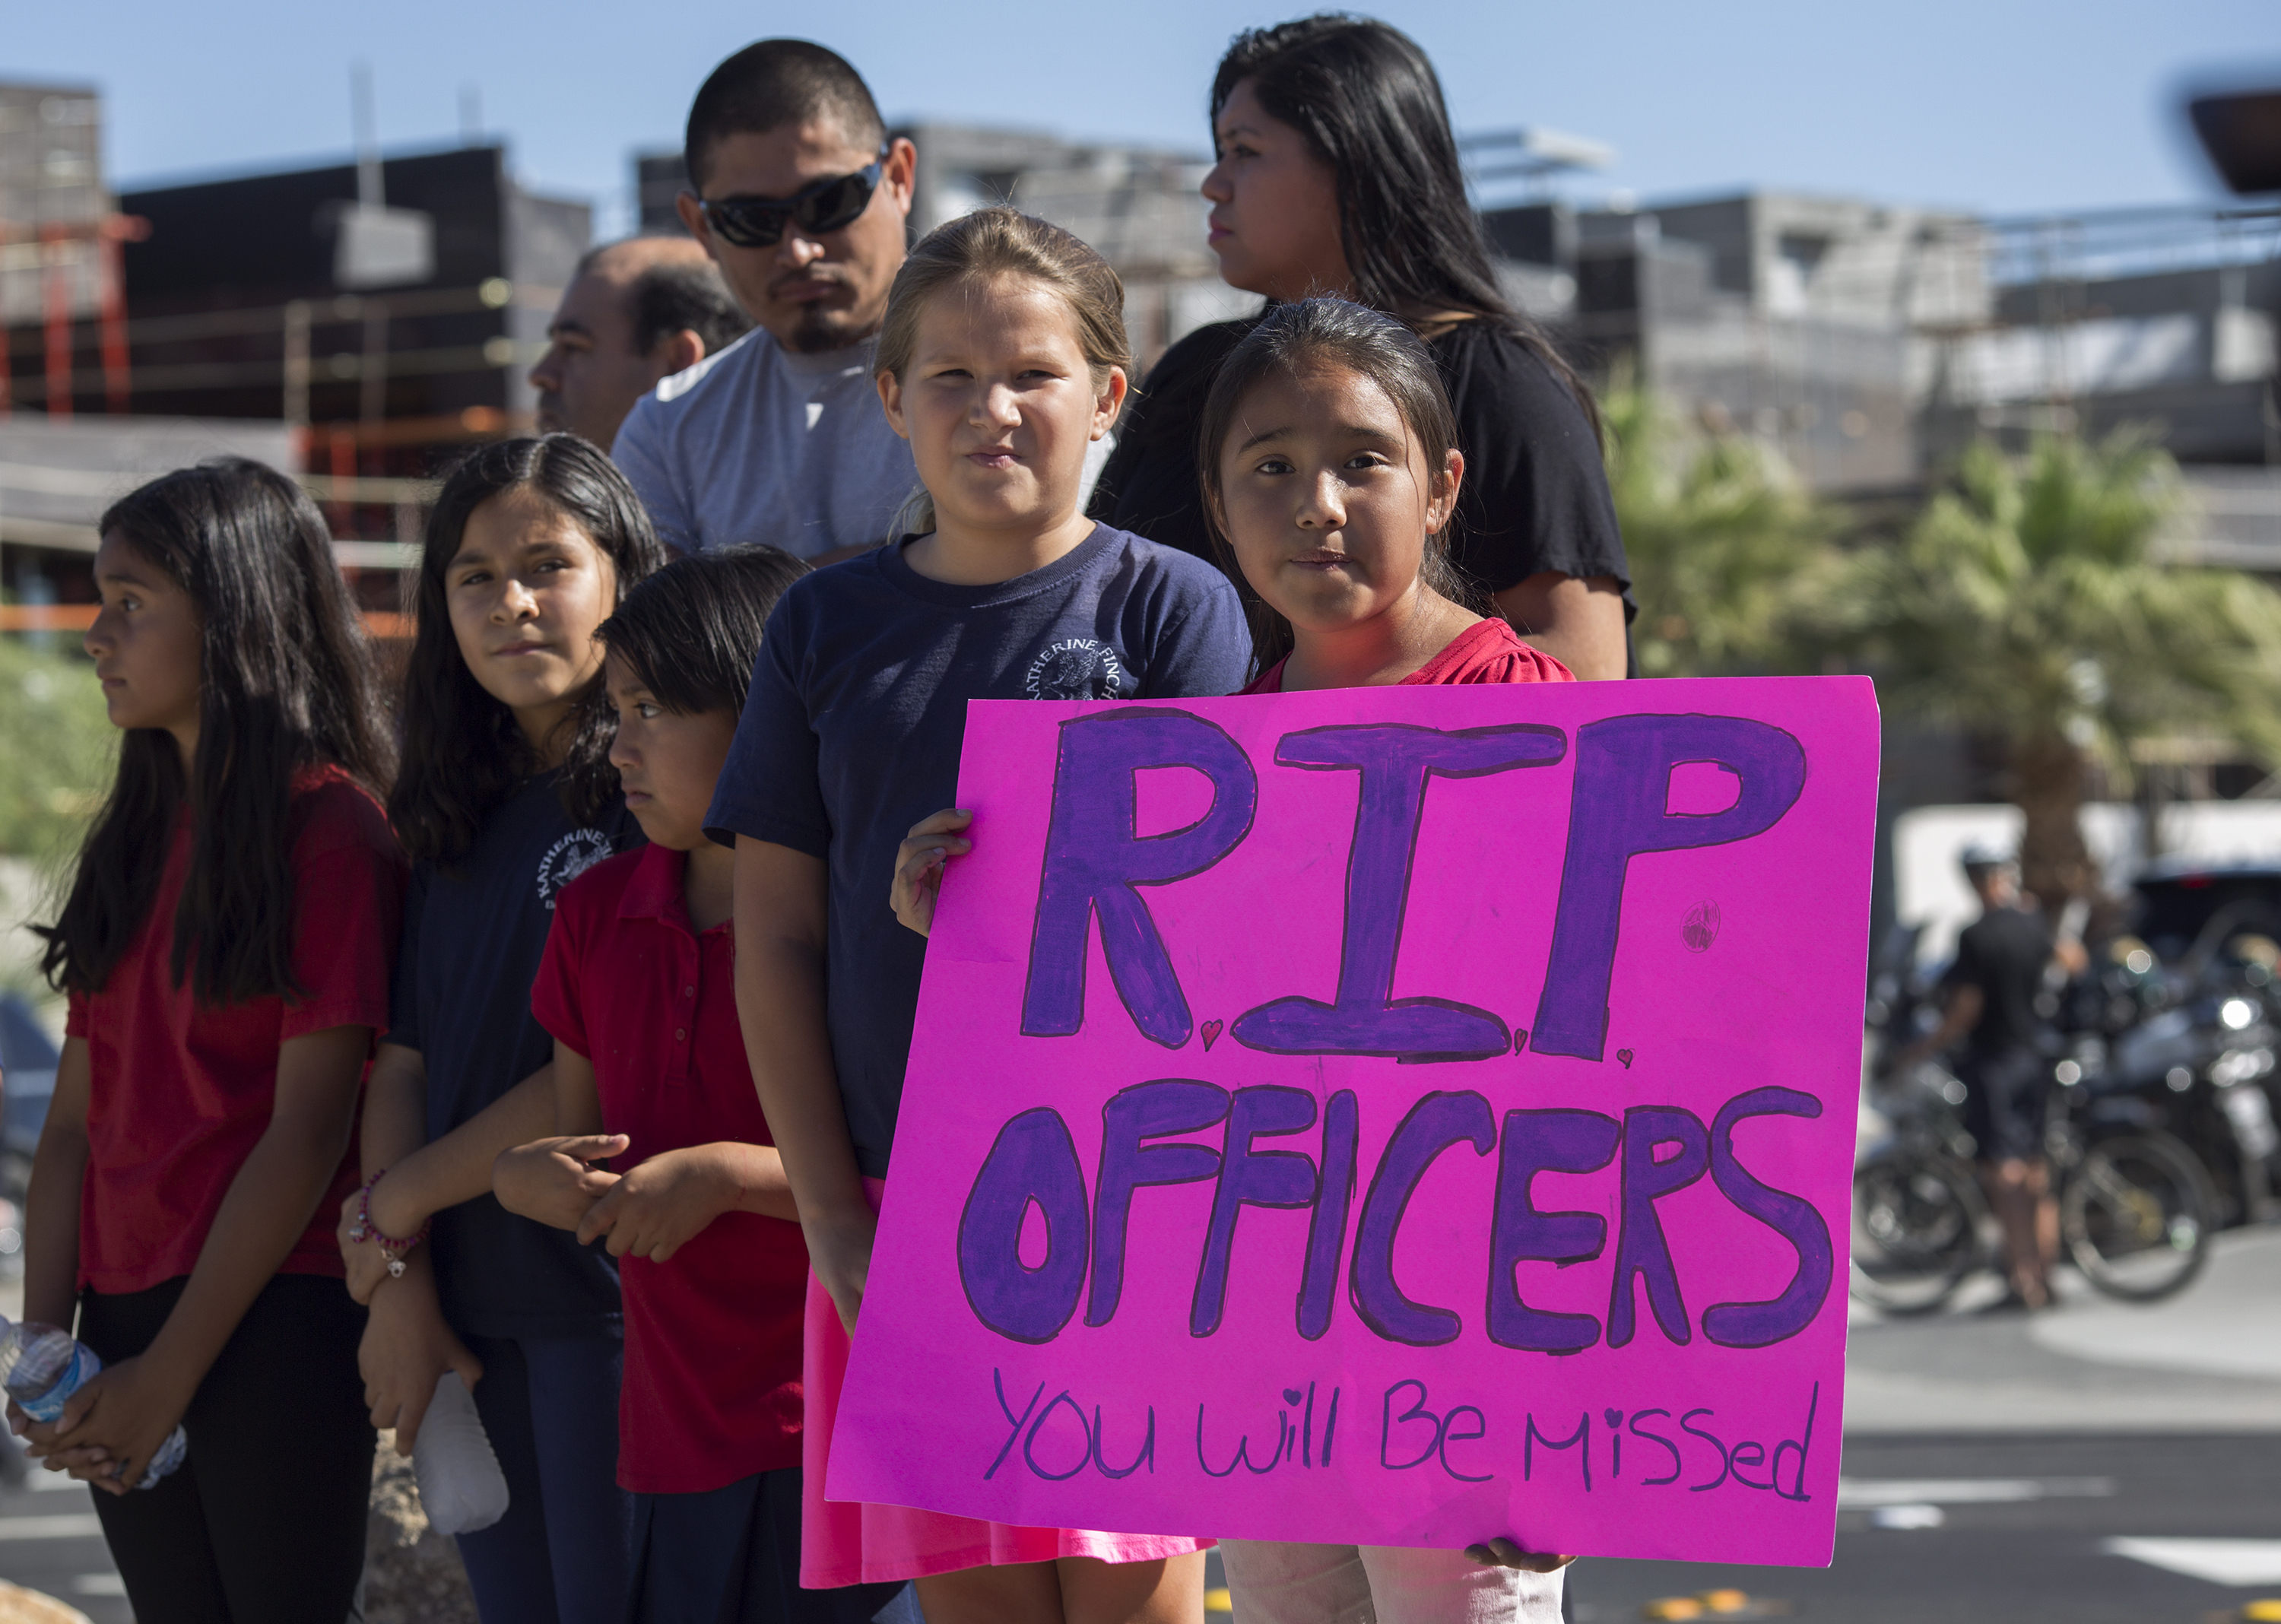 Fourth grade children from Katherine Finchy Elementary School pay respects outside funeral services for fallen Palm Springs Police officers Jose Gilbert Vega and Lesley Zerebny. (Photo by David McNew/Getty Images)